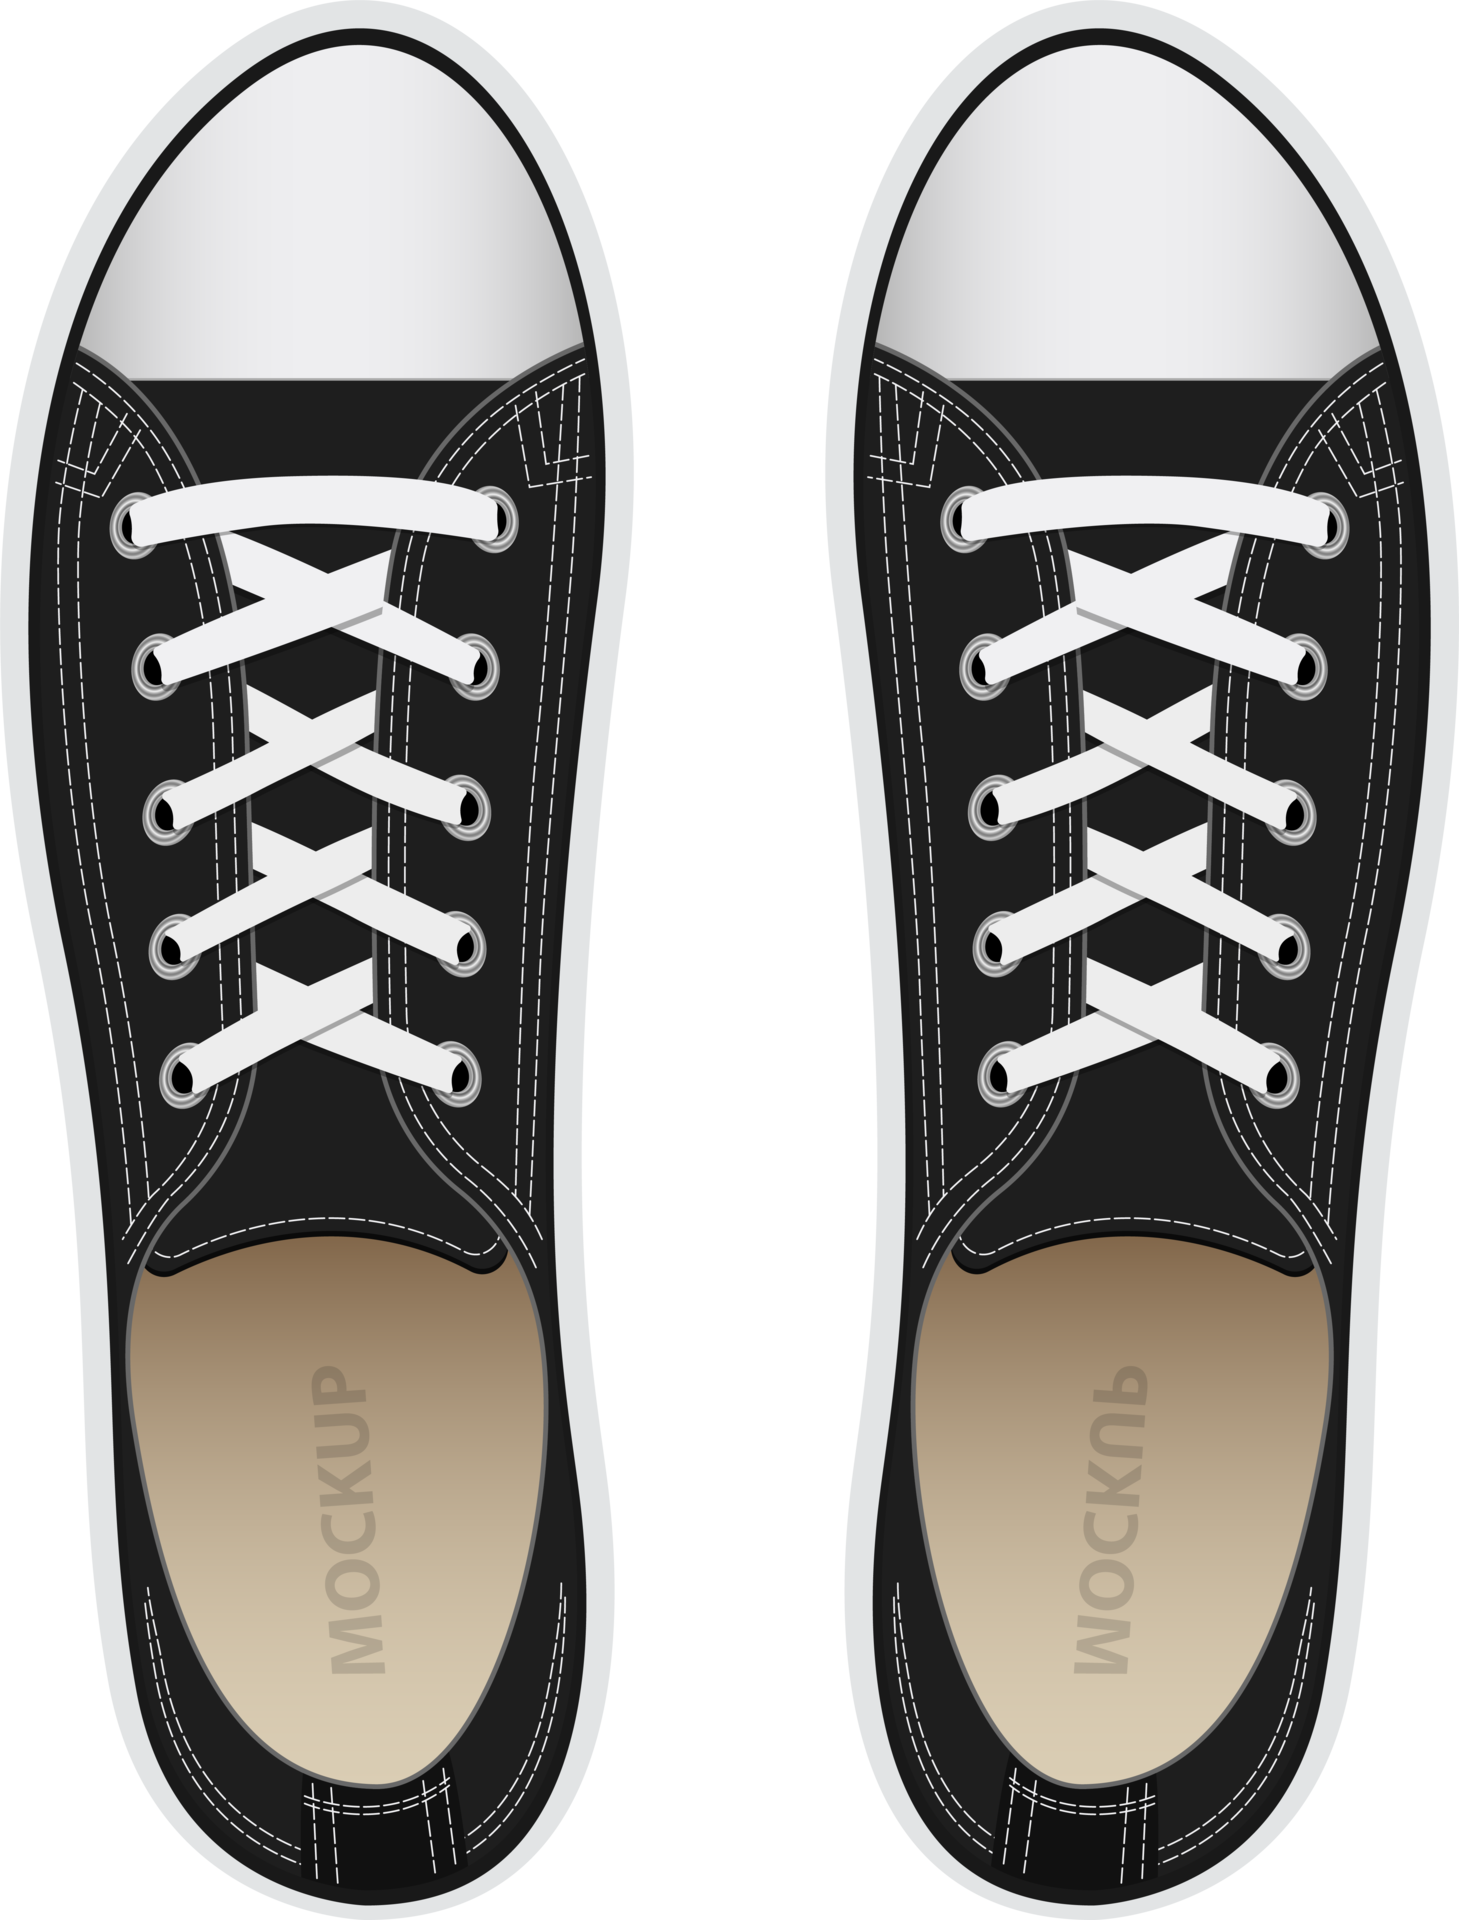 Shoes PNG Free Images with Transparent Background - (2,456 Free Downloads)